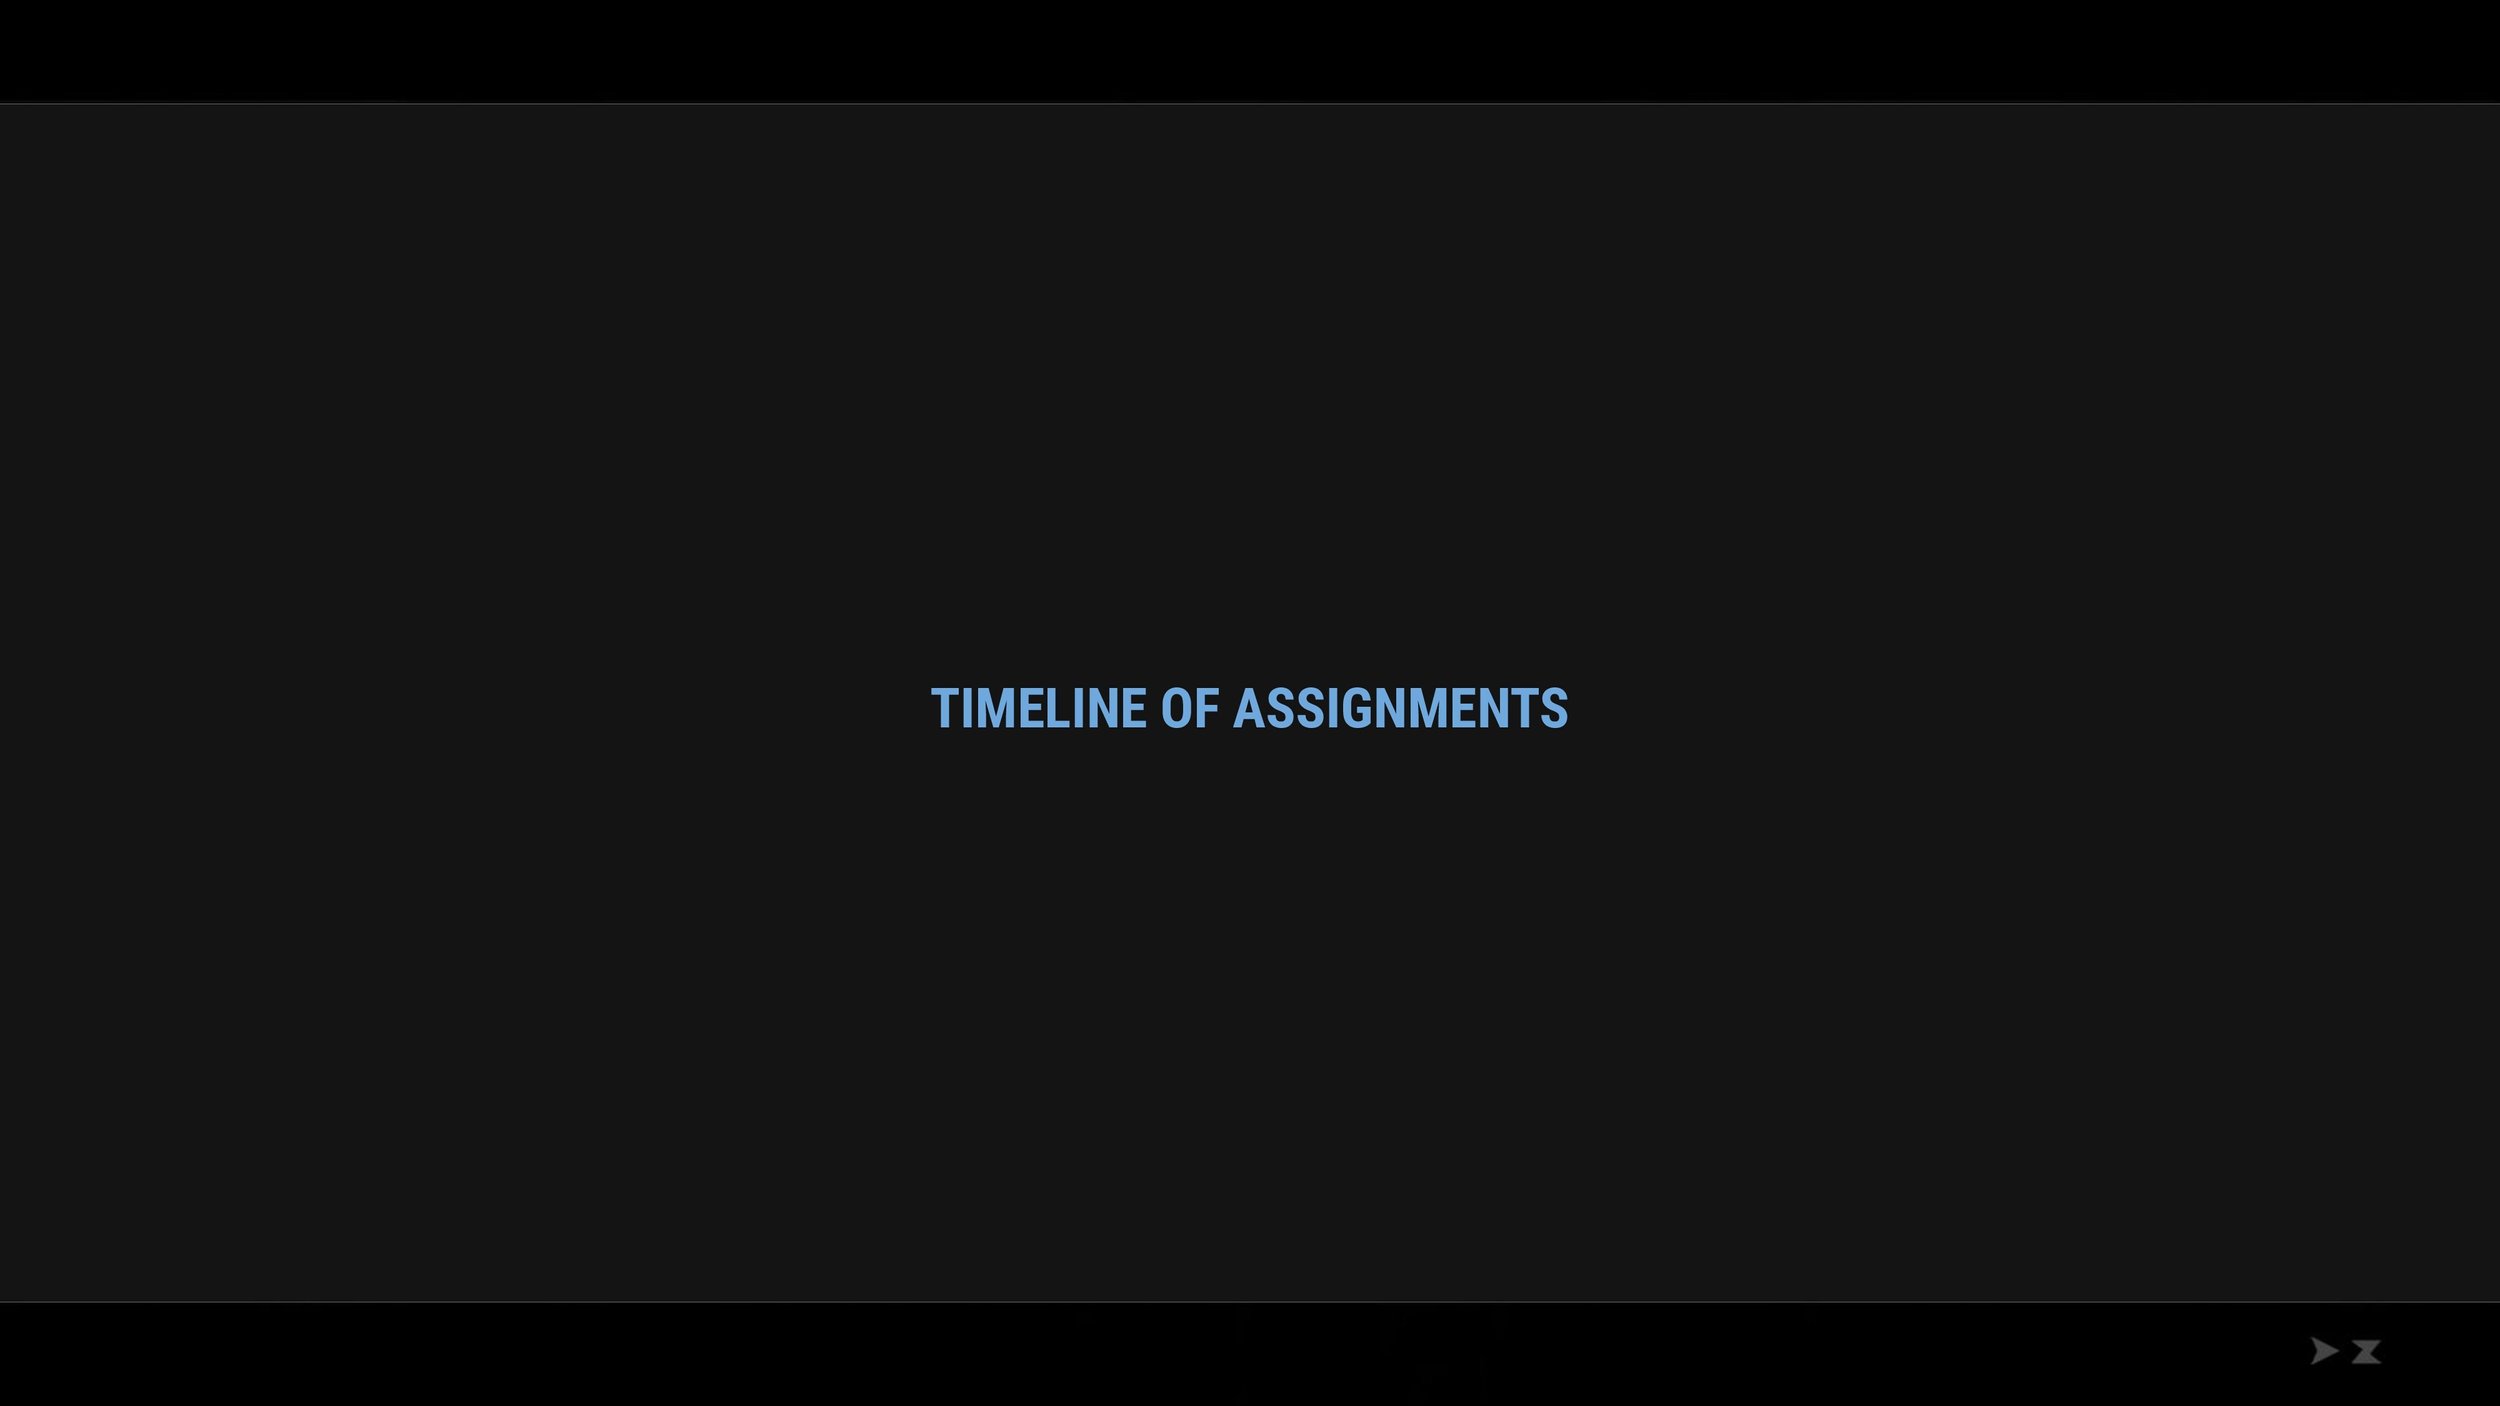 Timeline of Assignments_00001.jpg